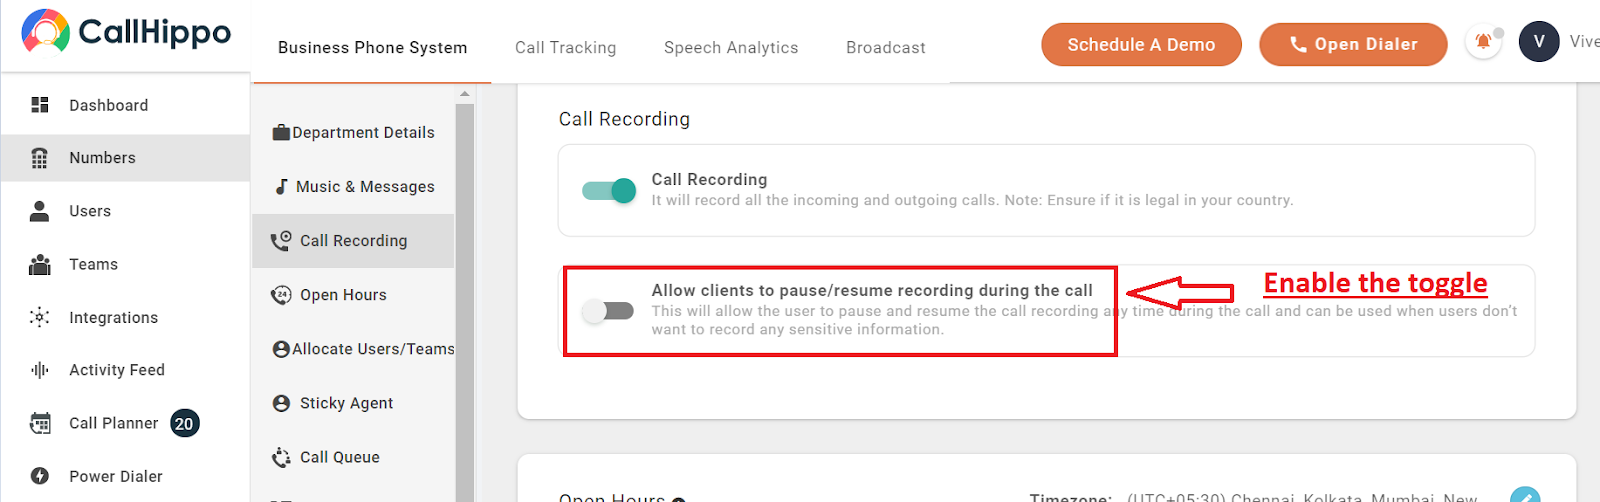 How to pause call recording in CallHippo